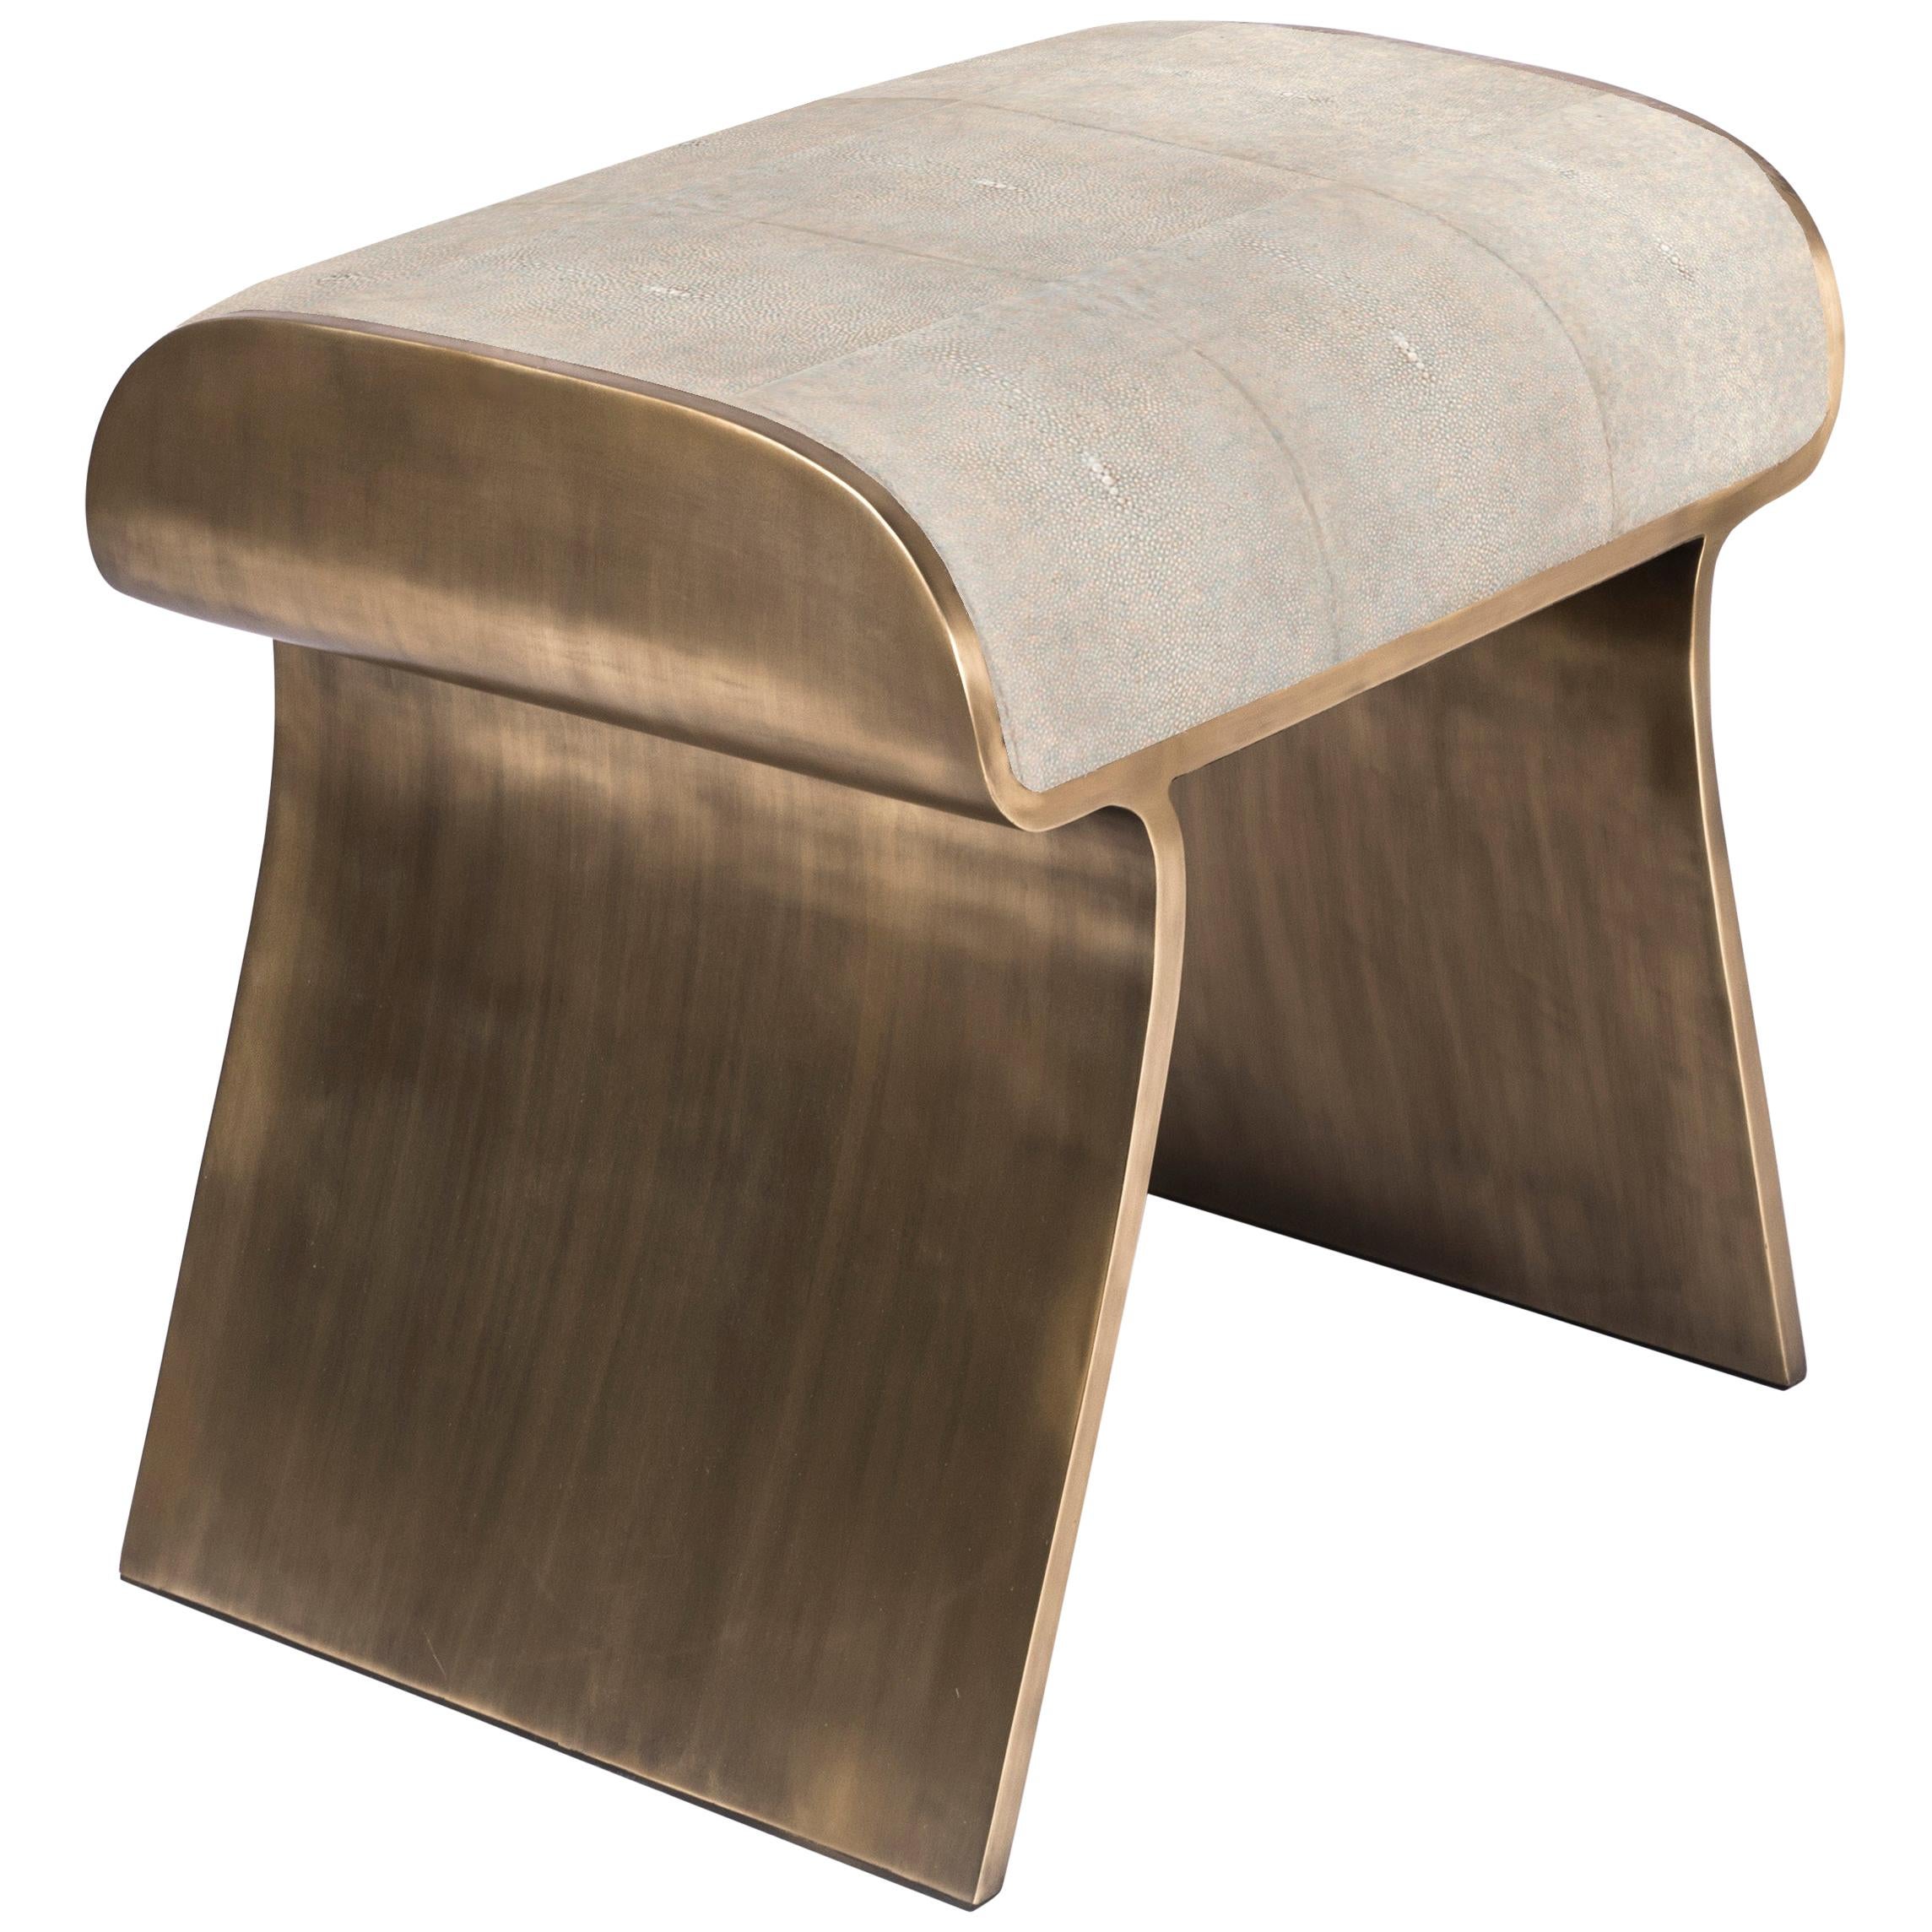 Hand-Crafted Dandy Side Table in Cream Shagreen and Bronze-Patina Brass by Kifu, Paris For Sale